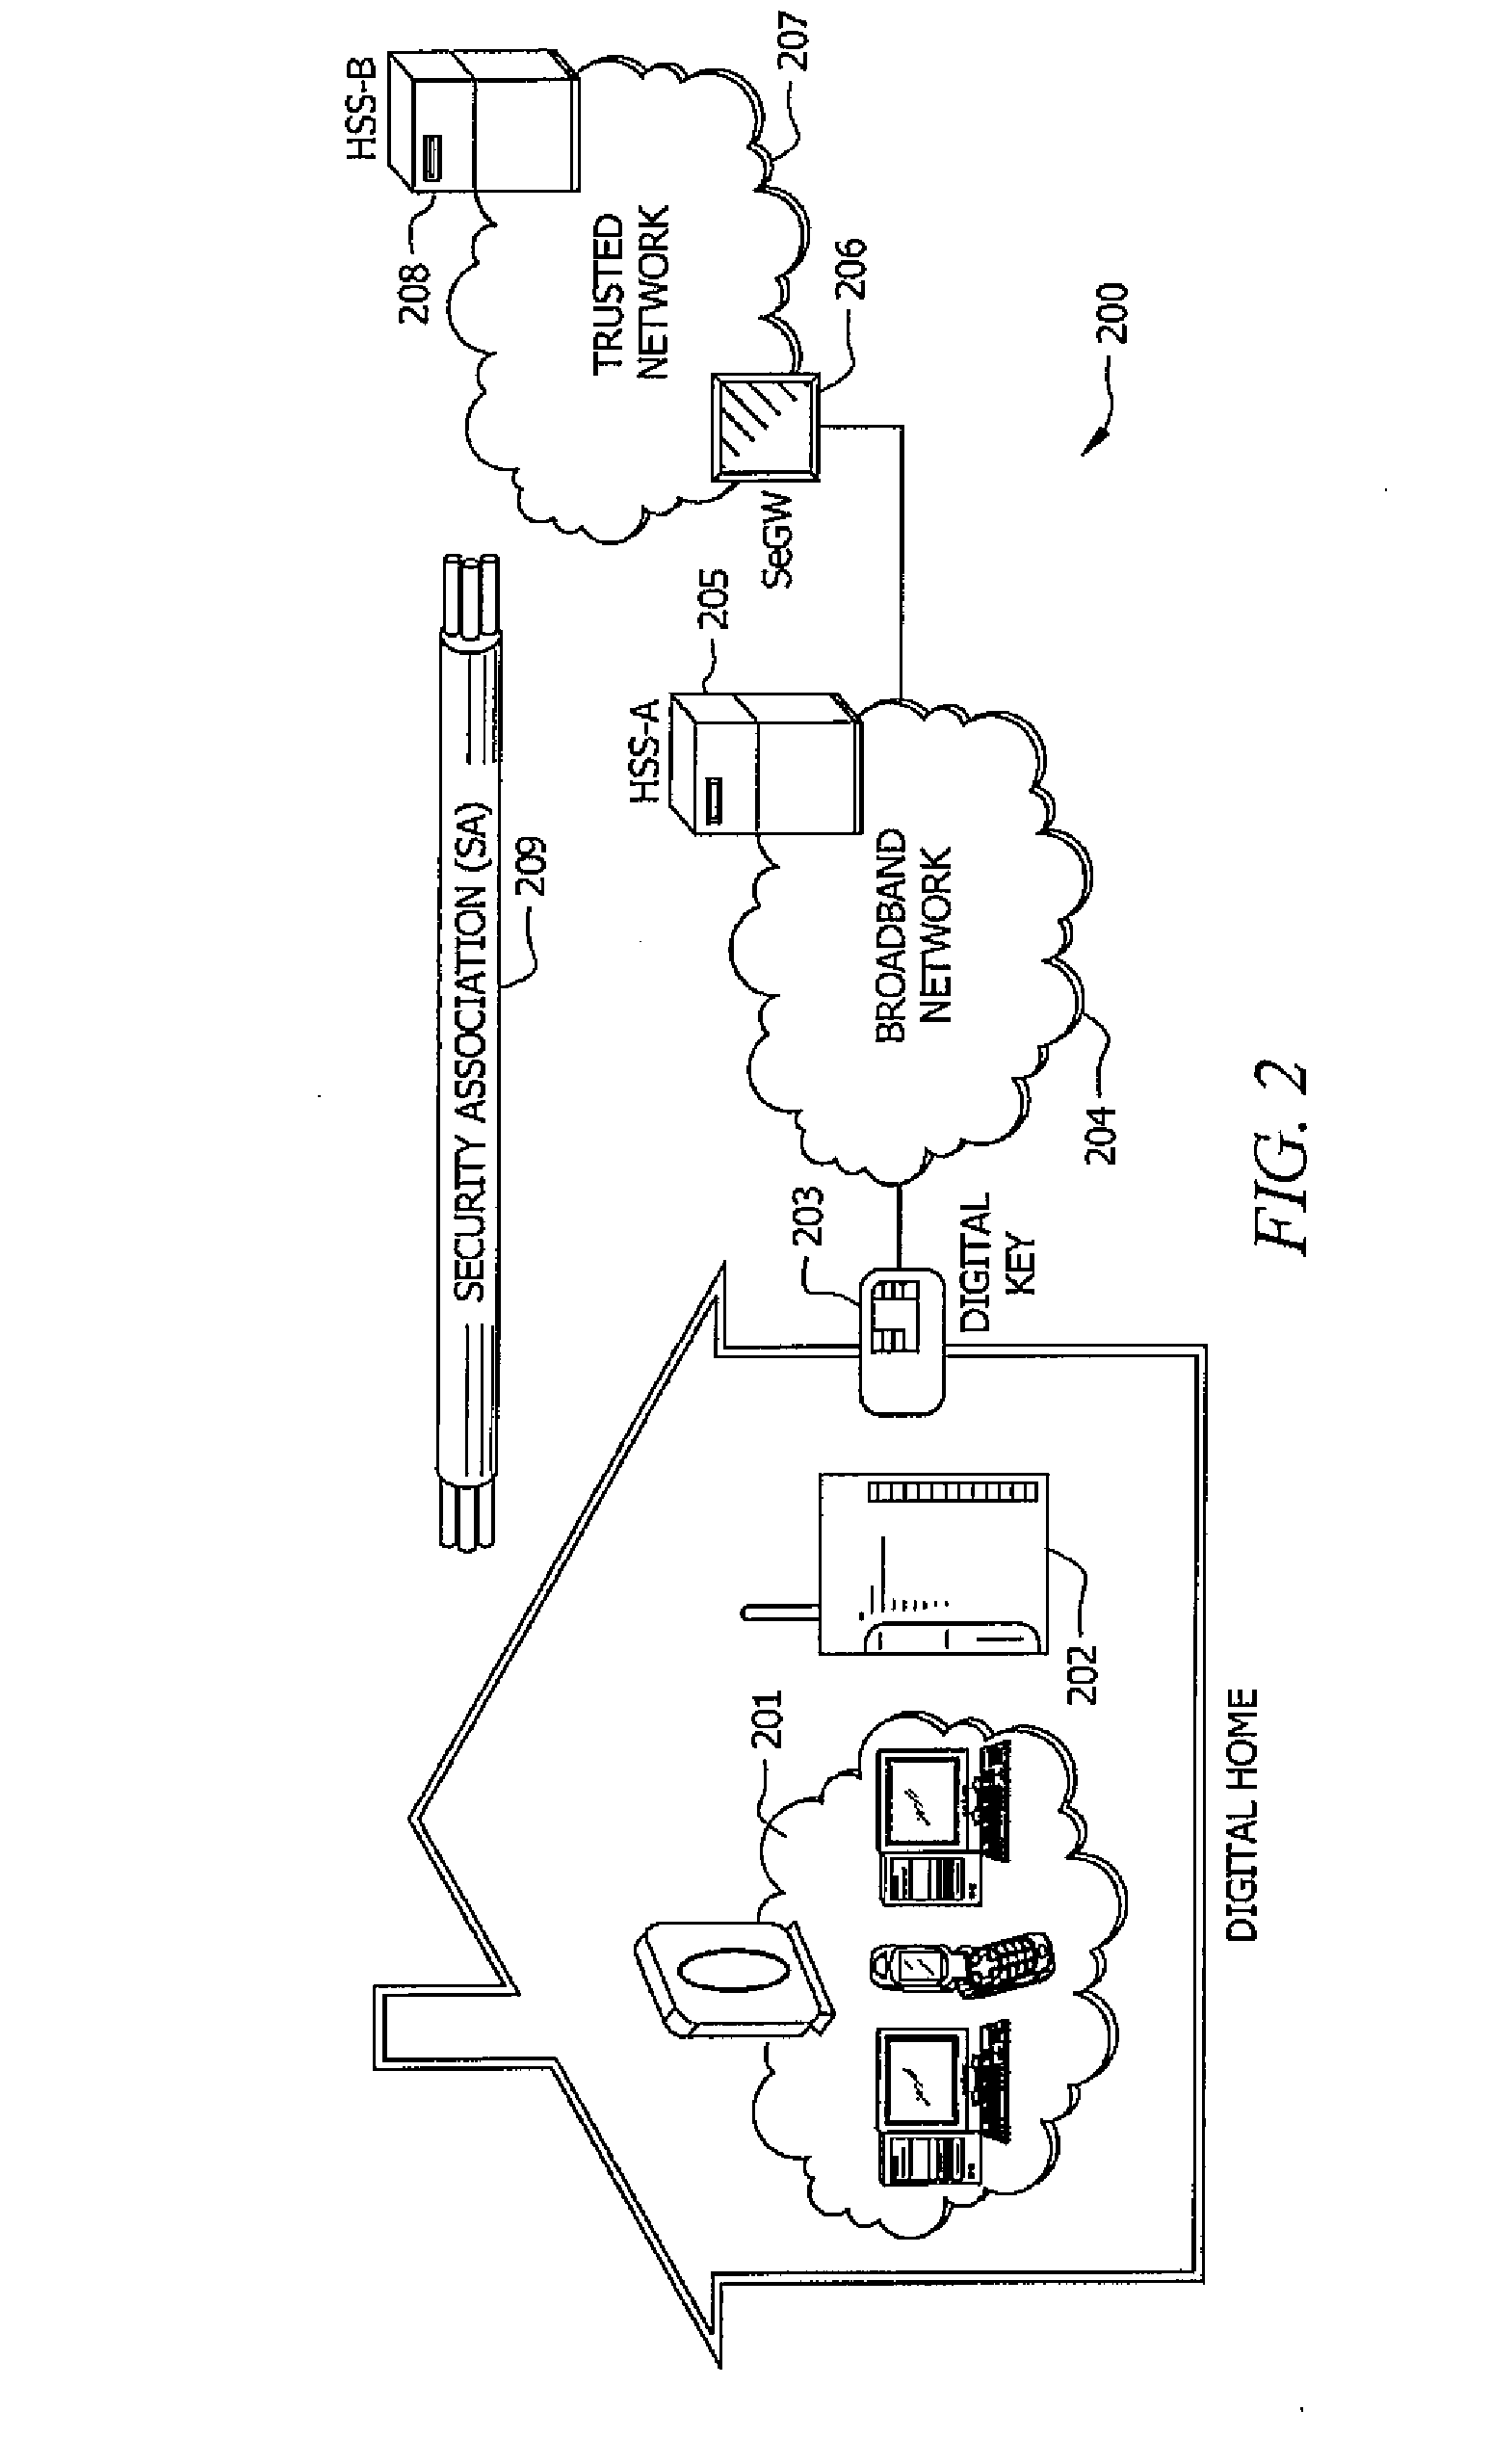 System and Method for Pre-Placing Secure Content on an End User Storage Device